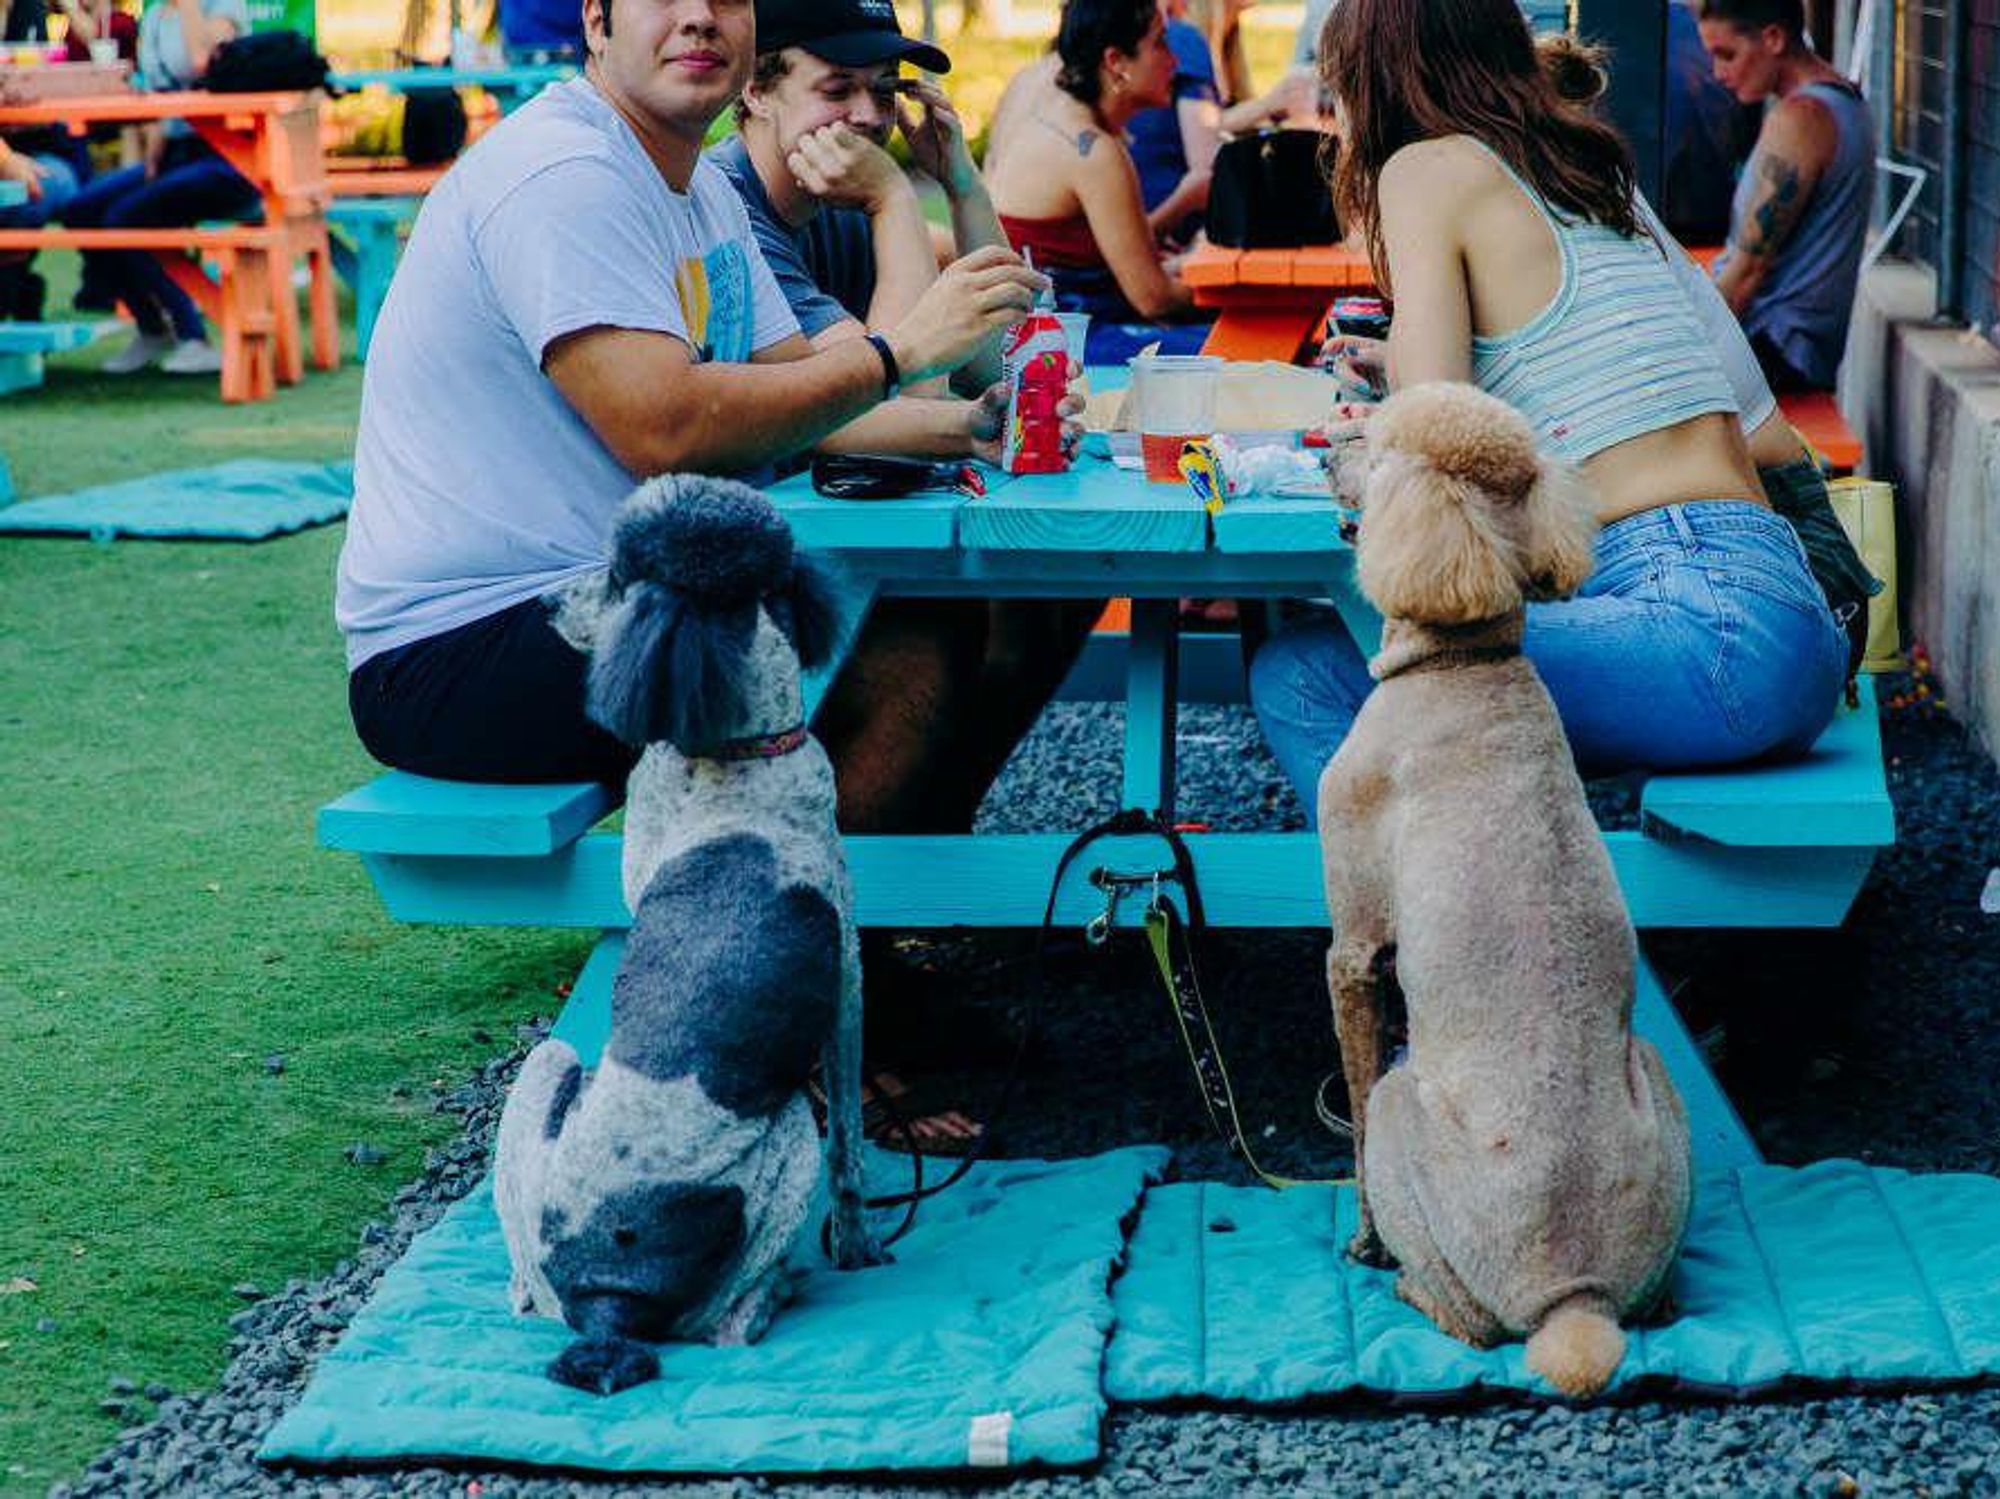 Official Fest of Tails Yappy Hour raised funds last fall to upgrade the dog facilites at McAllister Park.